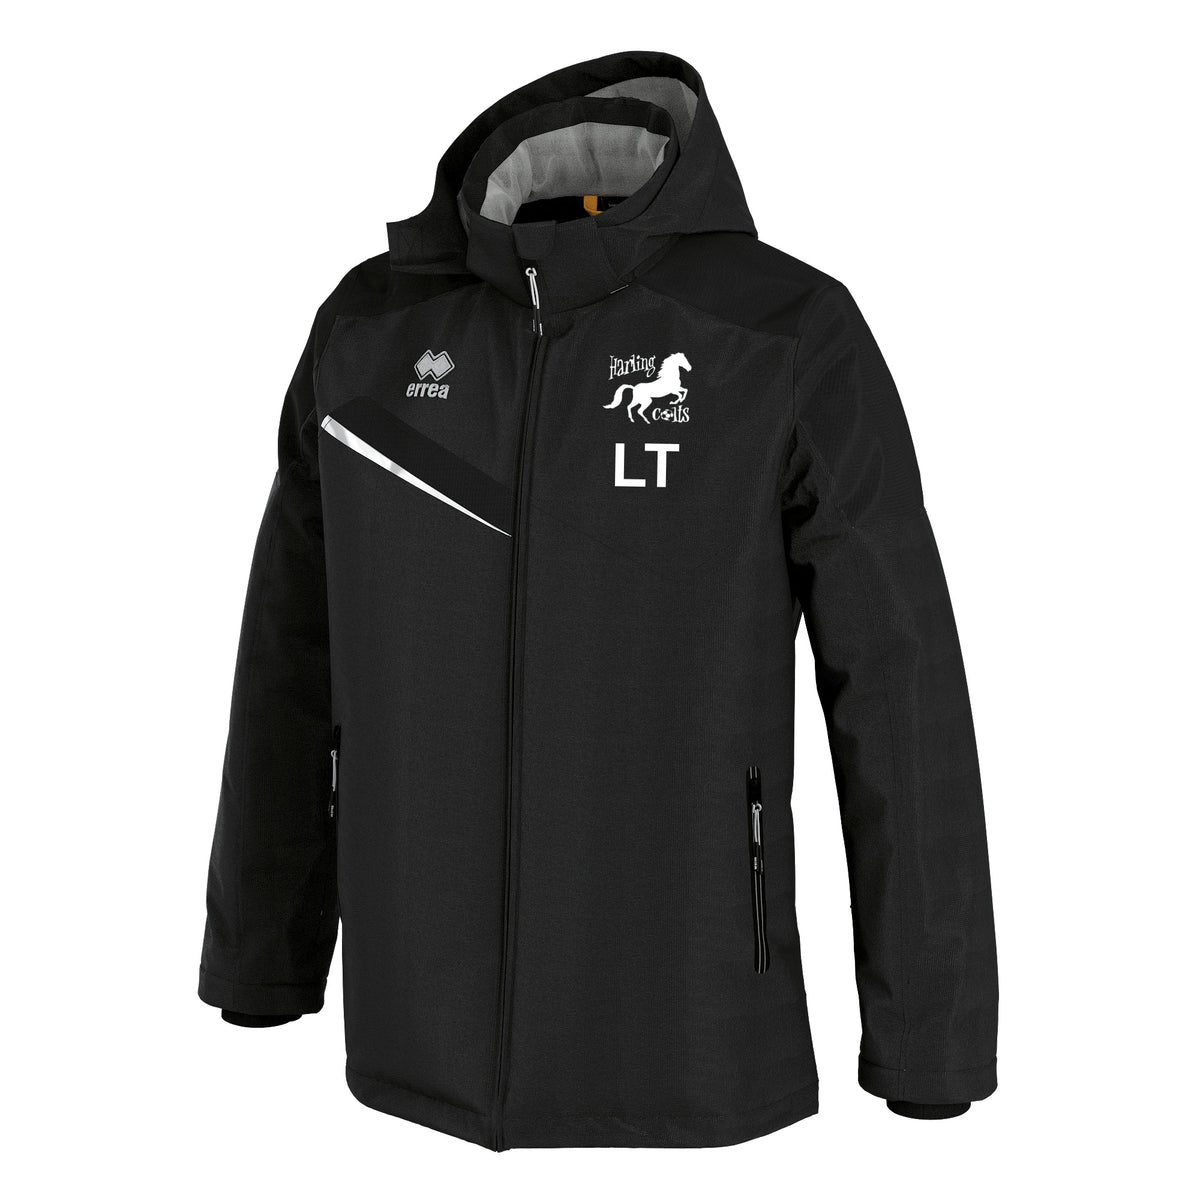 Harling Colts FC Iceland 3.0 Jacket in Adult